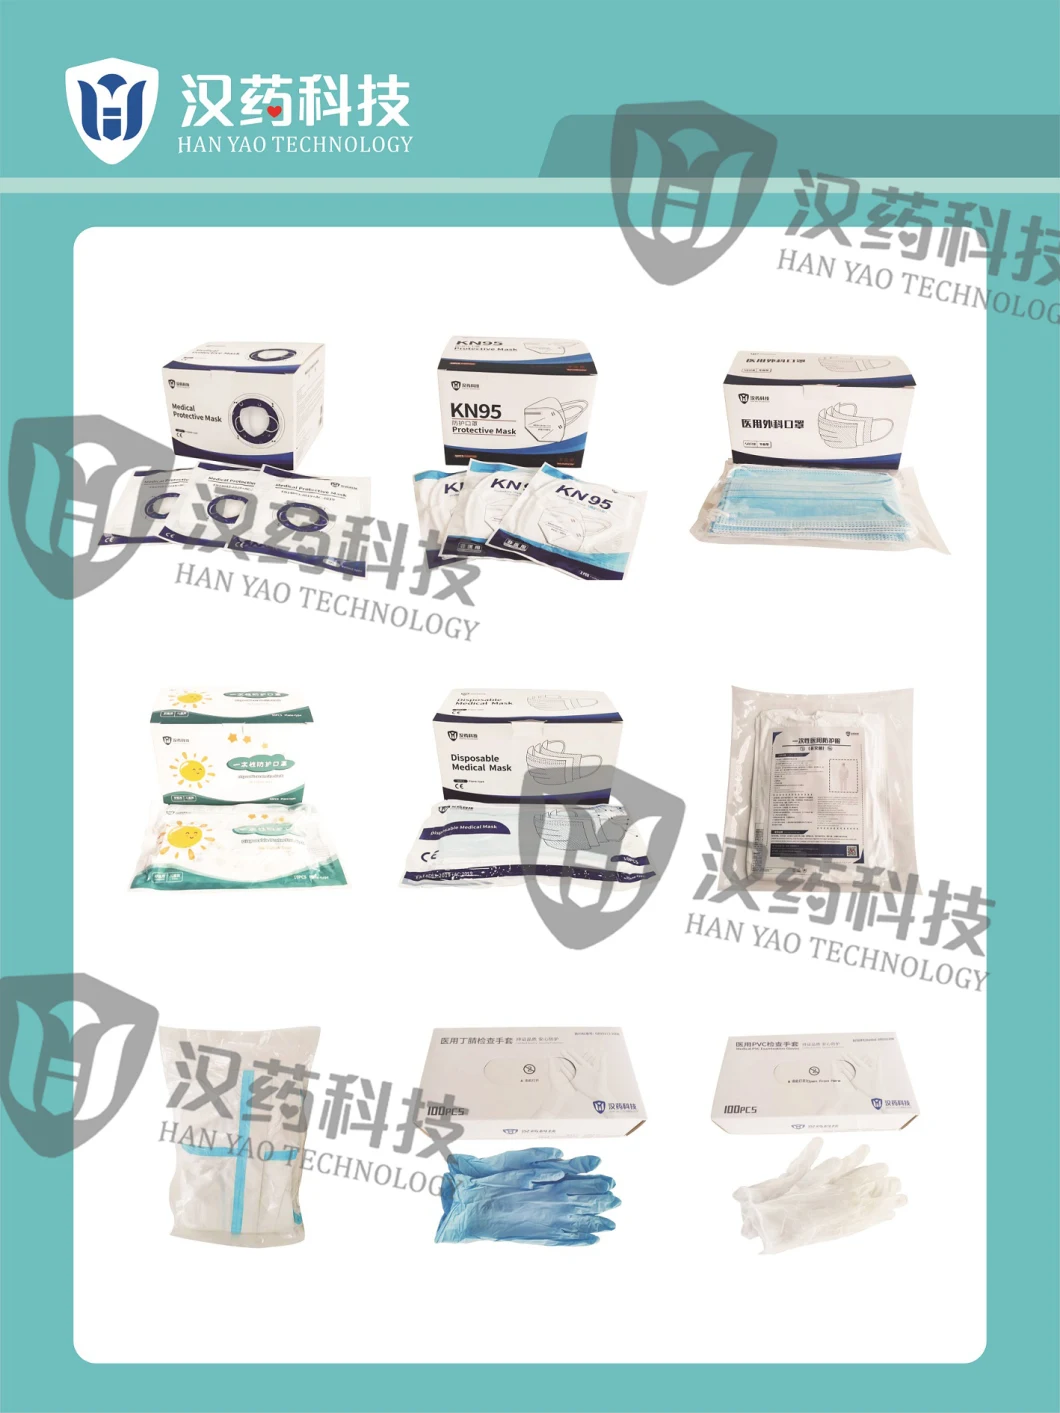 Factory Supply FDA Registration Disposable Isolation Gowns for Medical Professionals